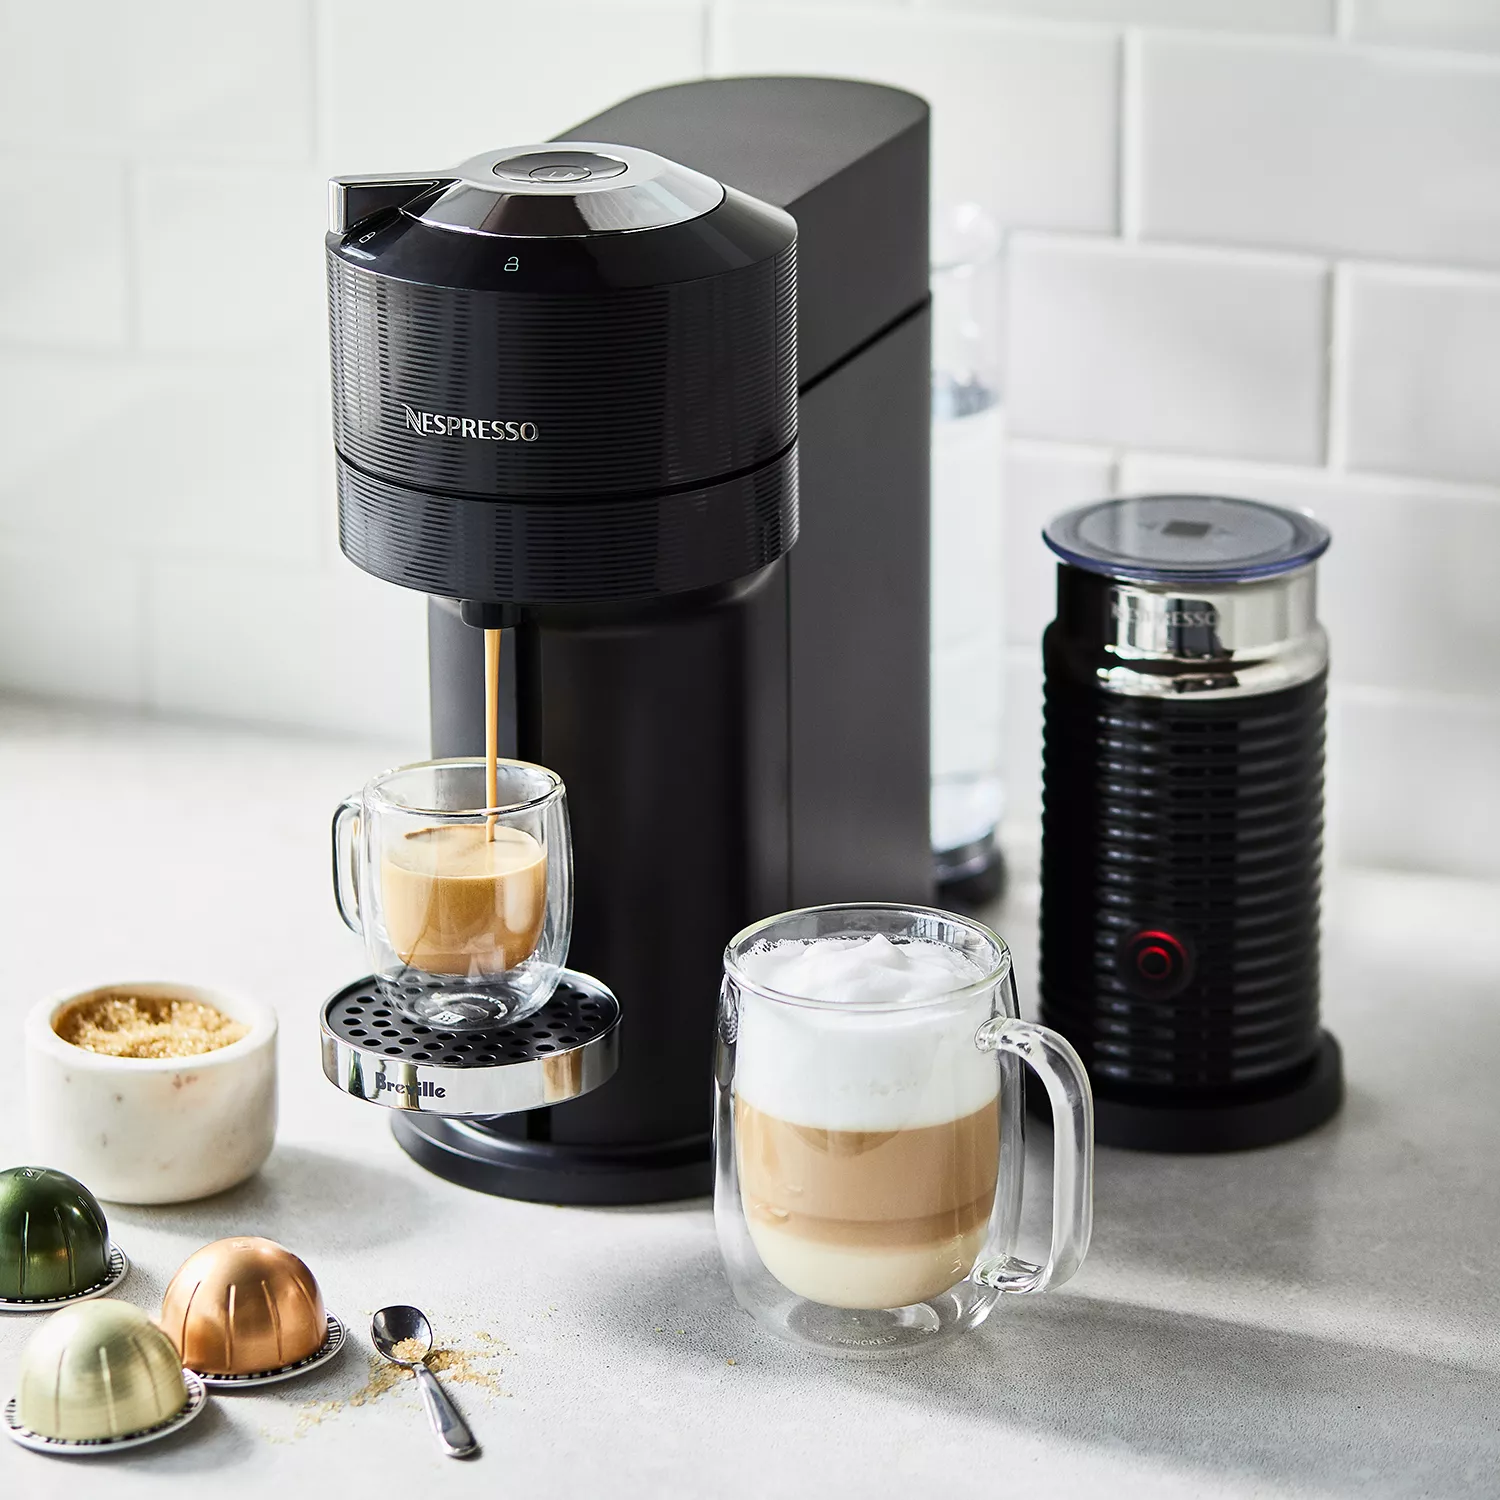 Nespresso VertuoLine by Breville with Aeroccino3 Frother